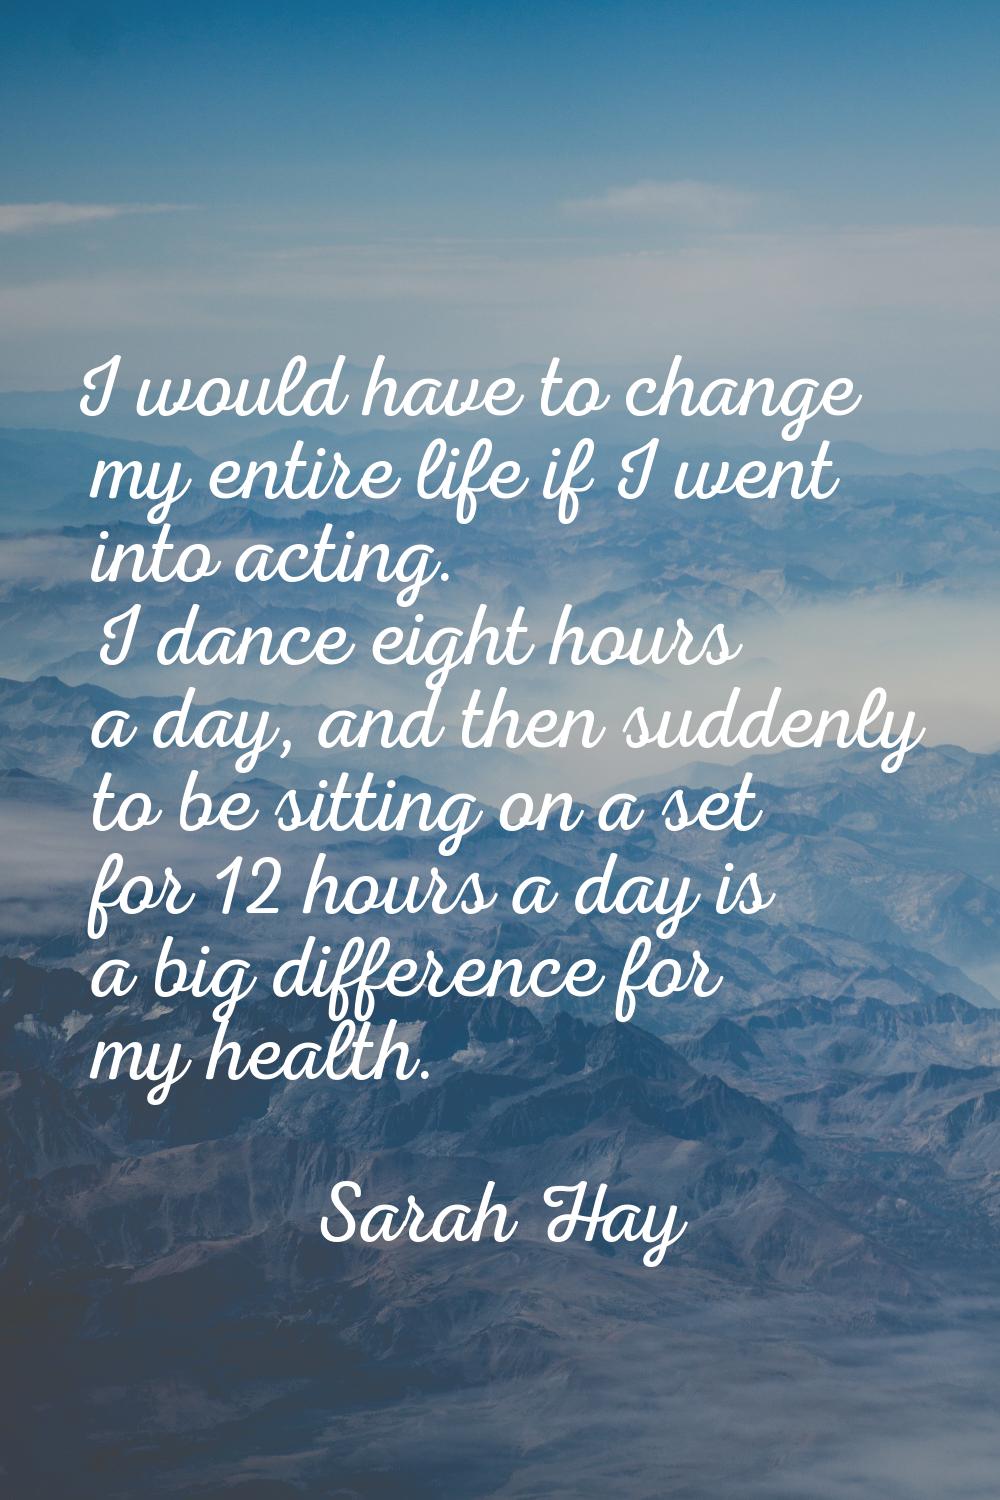 I would have to change my entire life if I went into acting. I dance eight hours a day, and then su